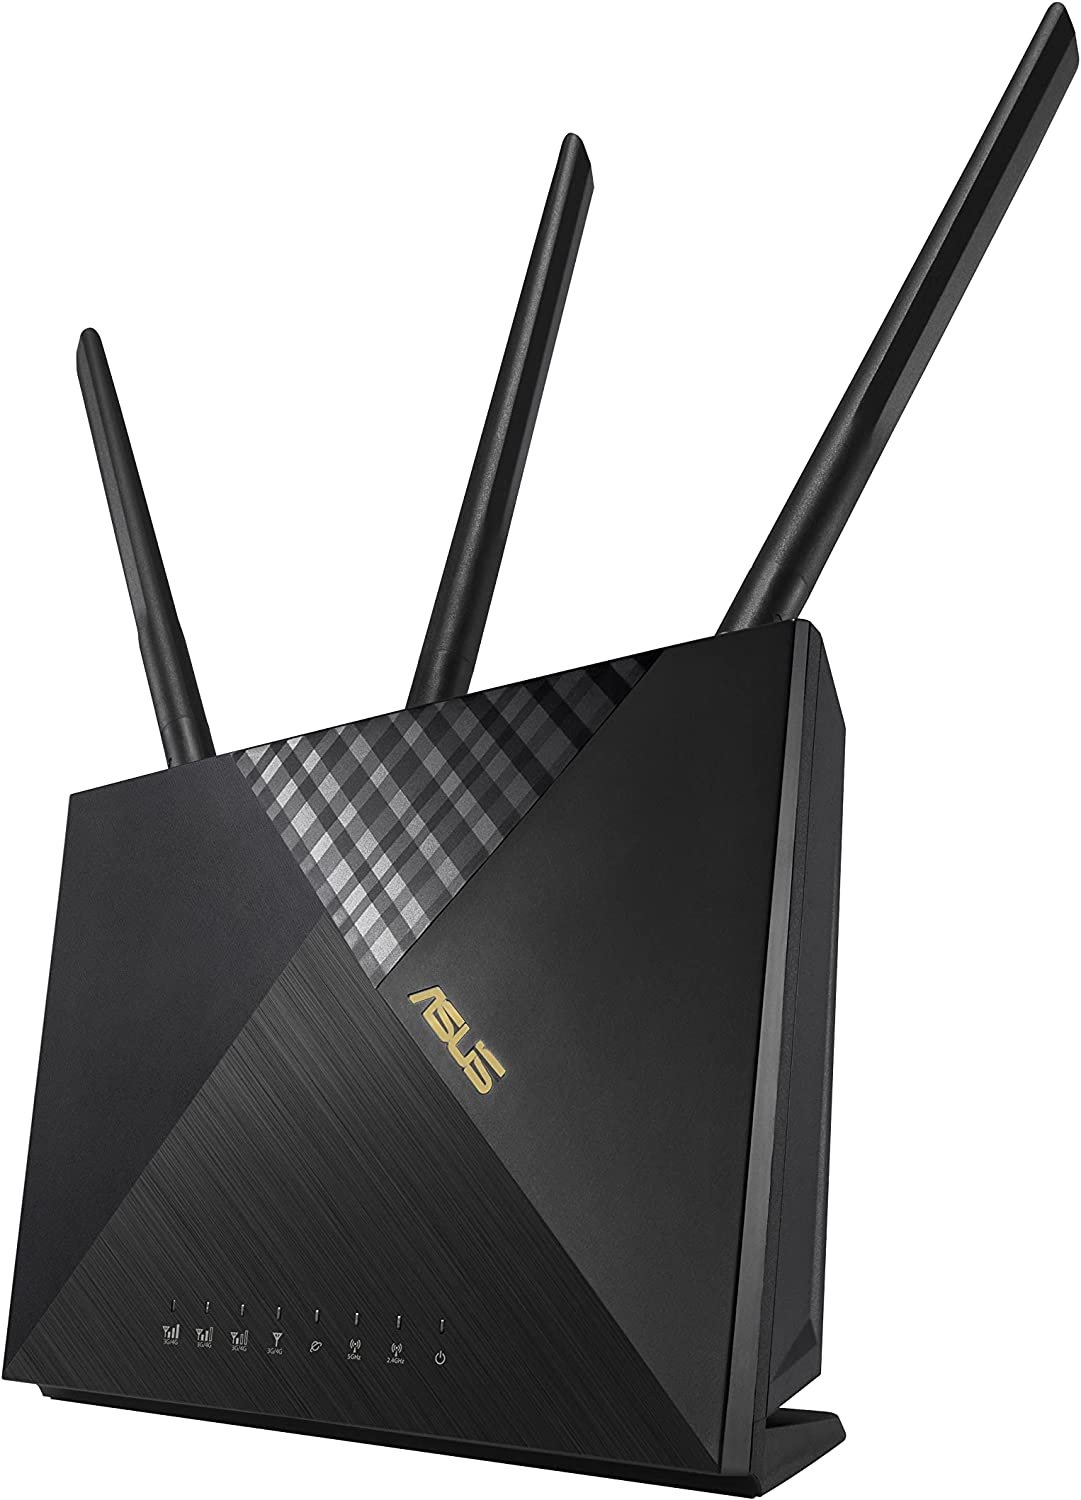 ASUS 4G-AX56 AX1800, Router - 1